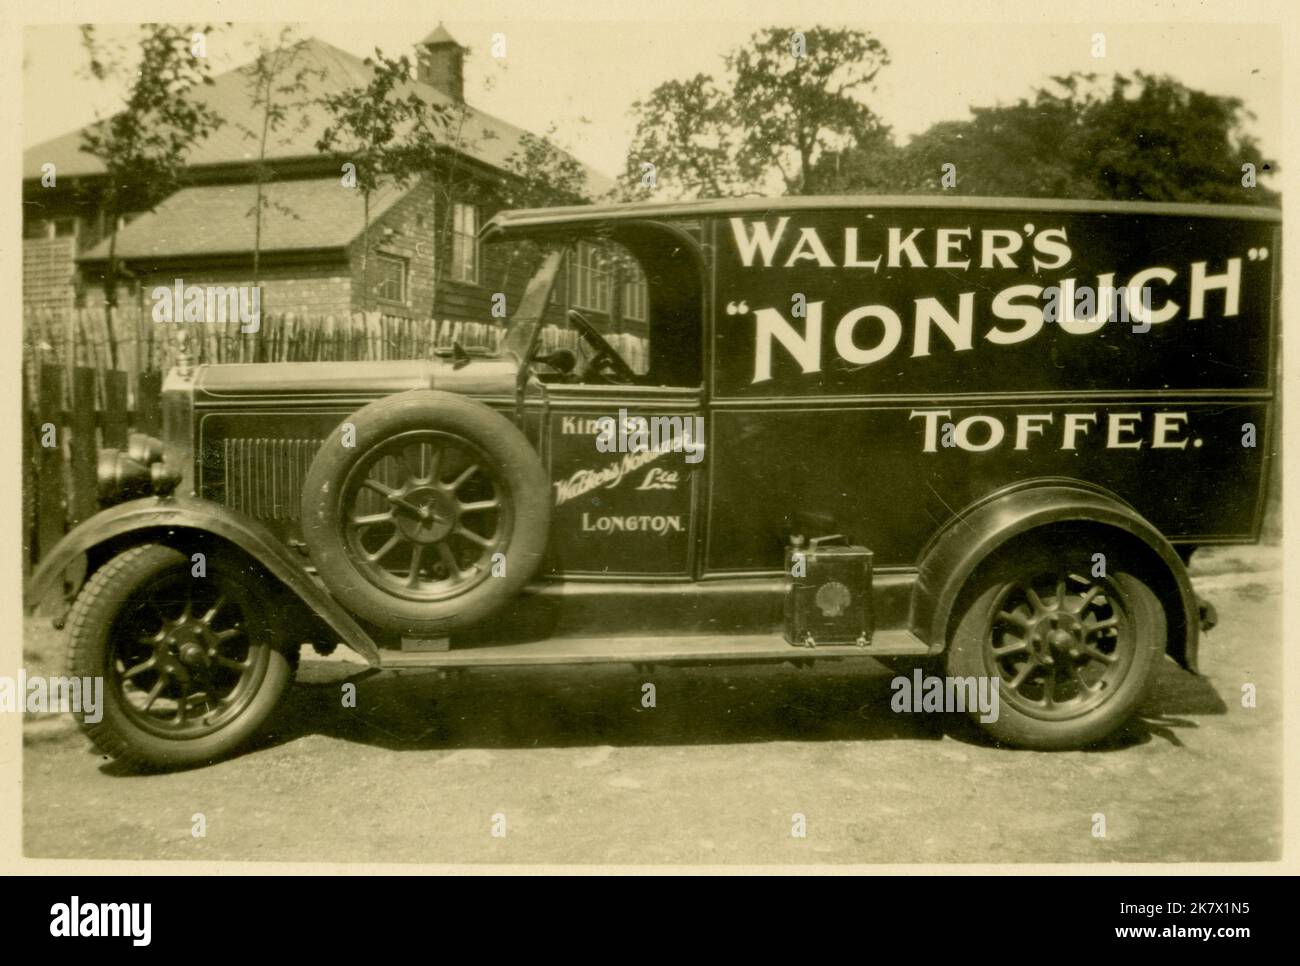 Original photograph of 1920's era postcard of Walker's Nonsuch Toffee delivery van, Walkers Nonsuch Toffee Ltd advertising, dates to circa 1925. Longton, Stoke on Trent, U.K. Stock Photo